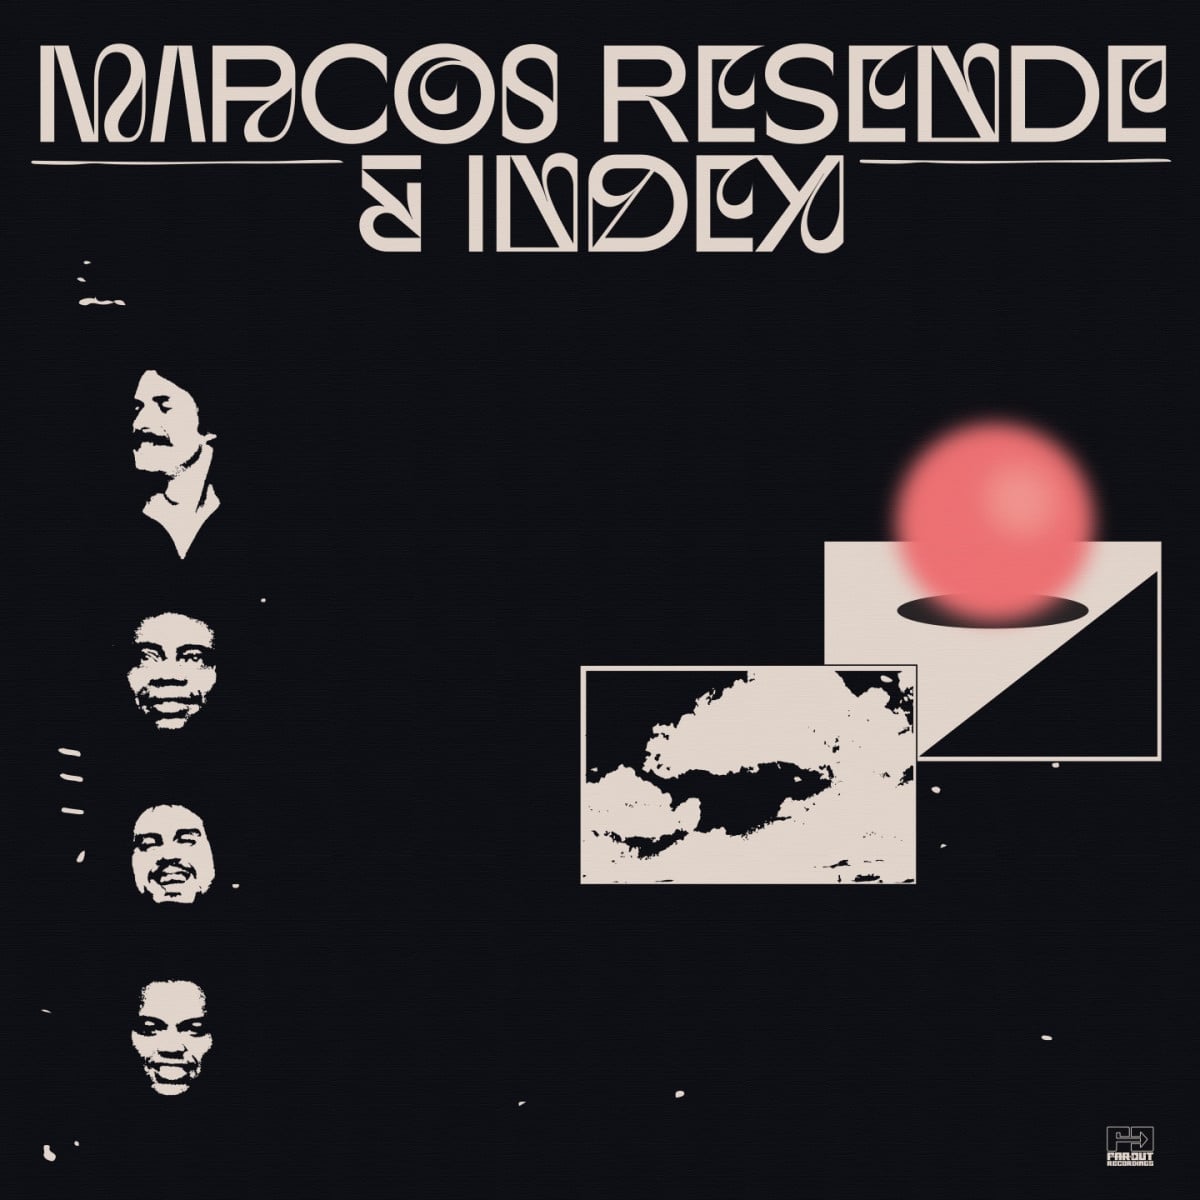 Marcos Resende/Index - Marcos Resende & Index - FARO220LP - FAR OUT RECORDS